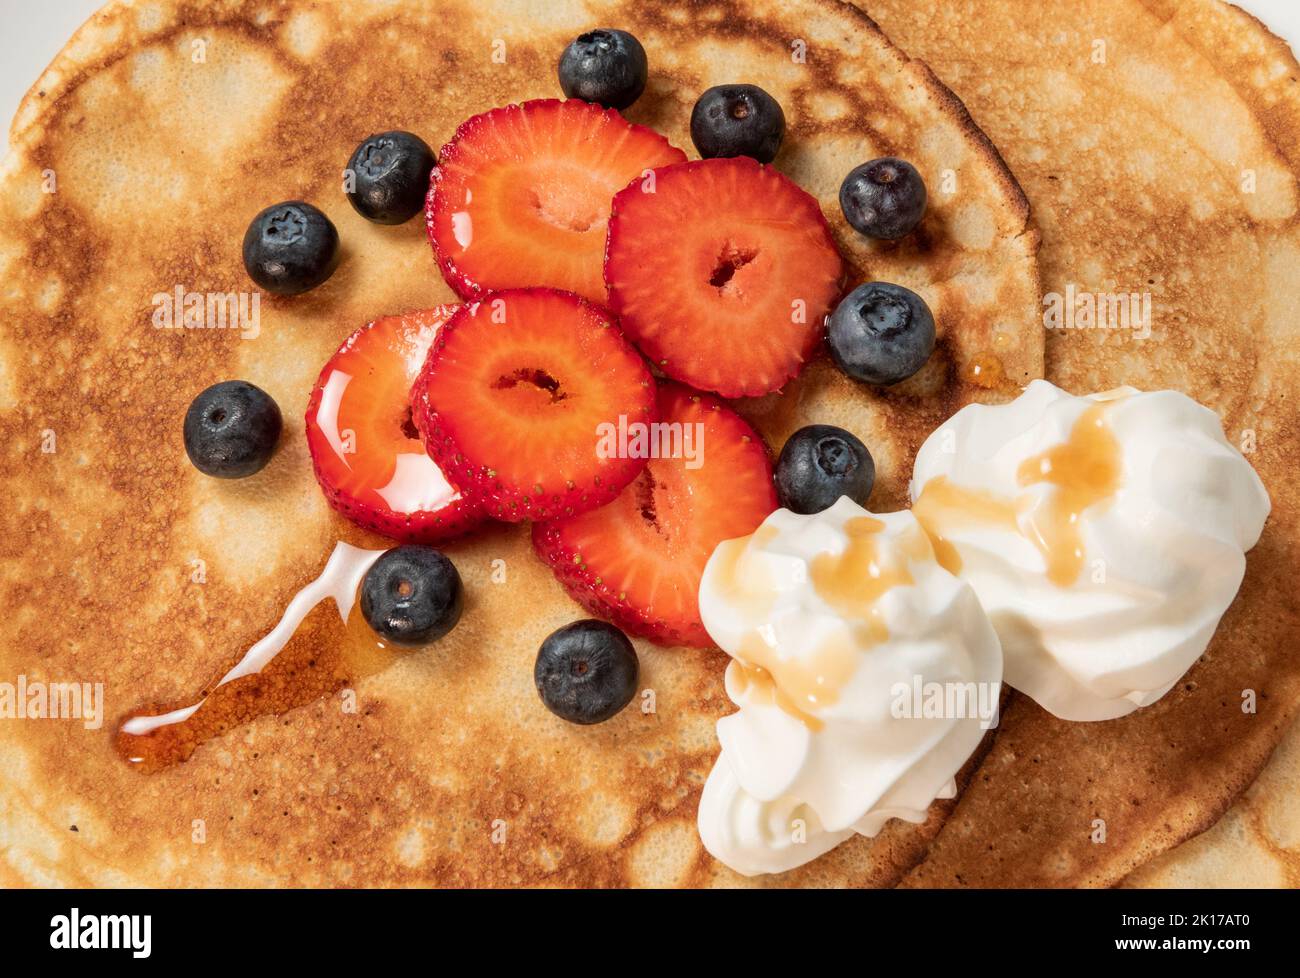 Pancakes with strawberries, blueberries, cream and syrup Stock Photo